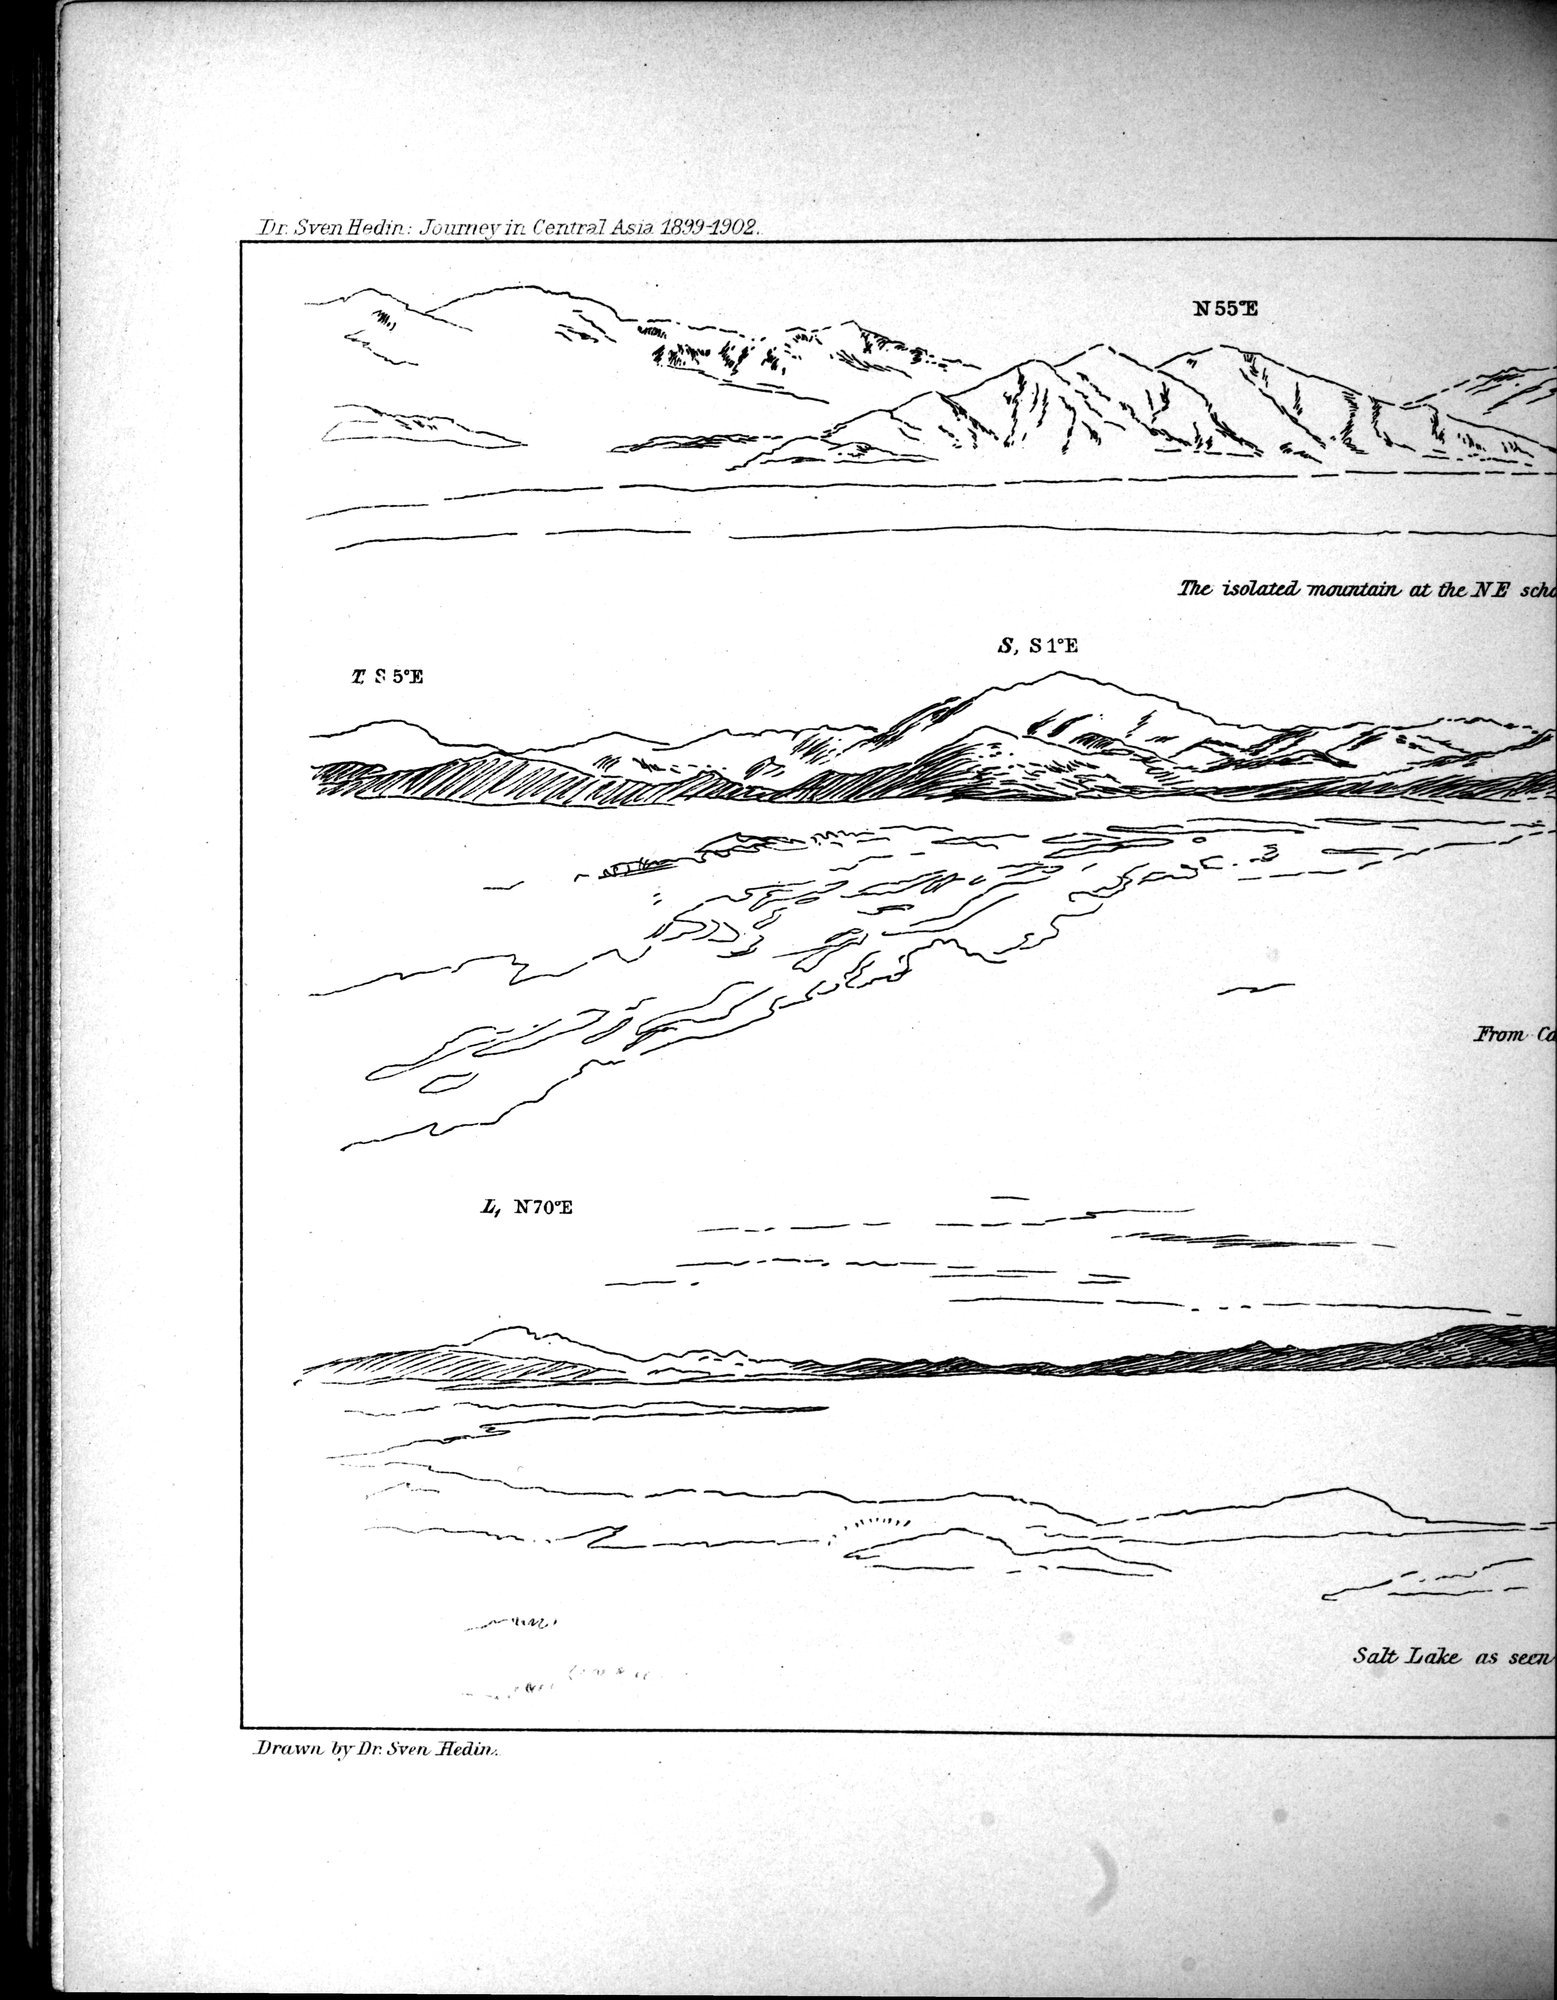 Scientific Results of a Journey in Central Asia, 1899-1902 : vol.3 / 610 ページ（白黒高解像度画像）